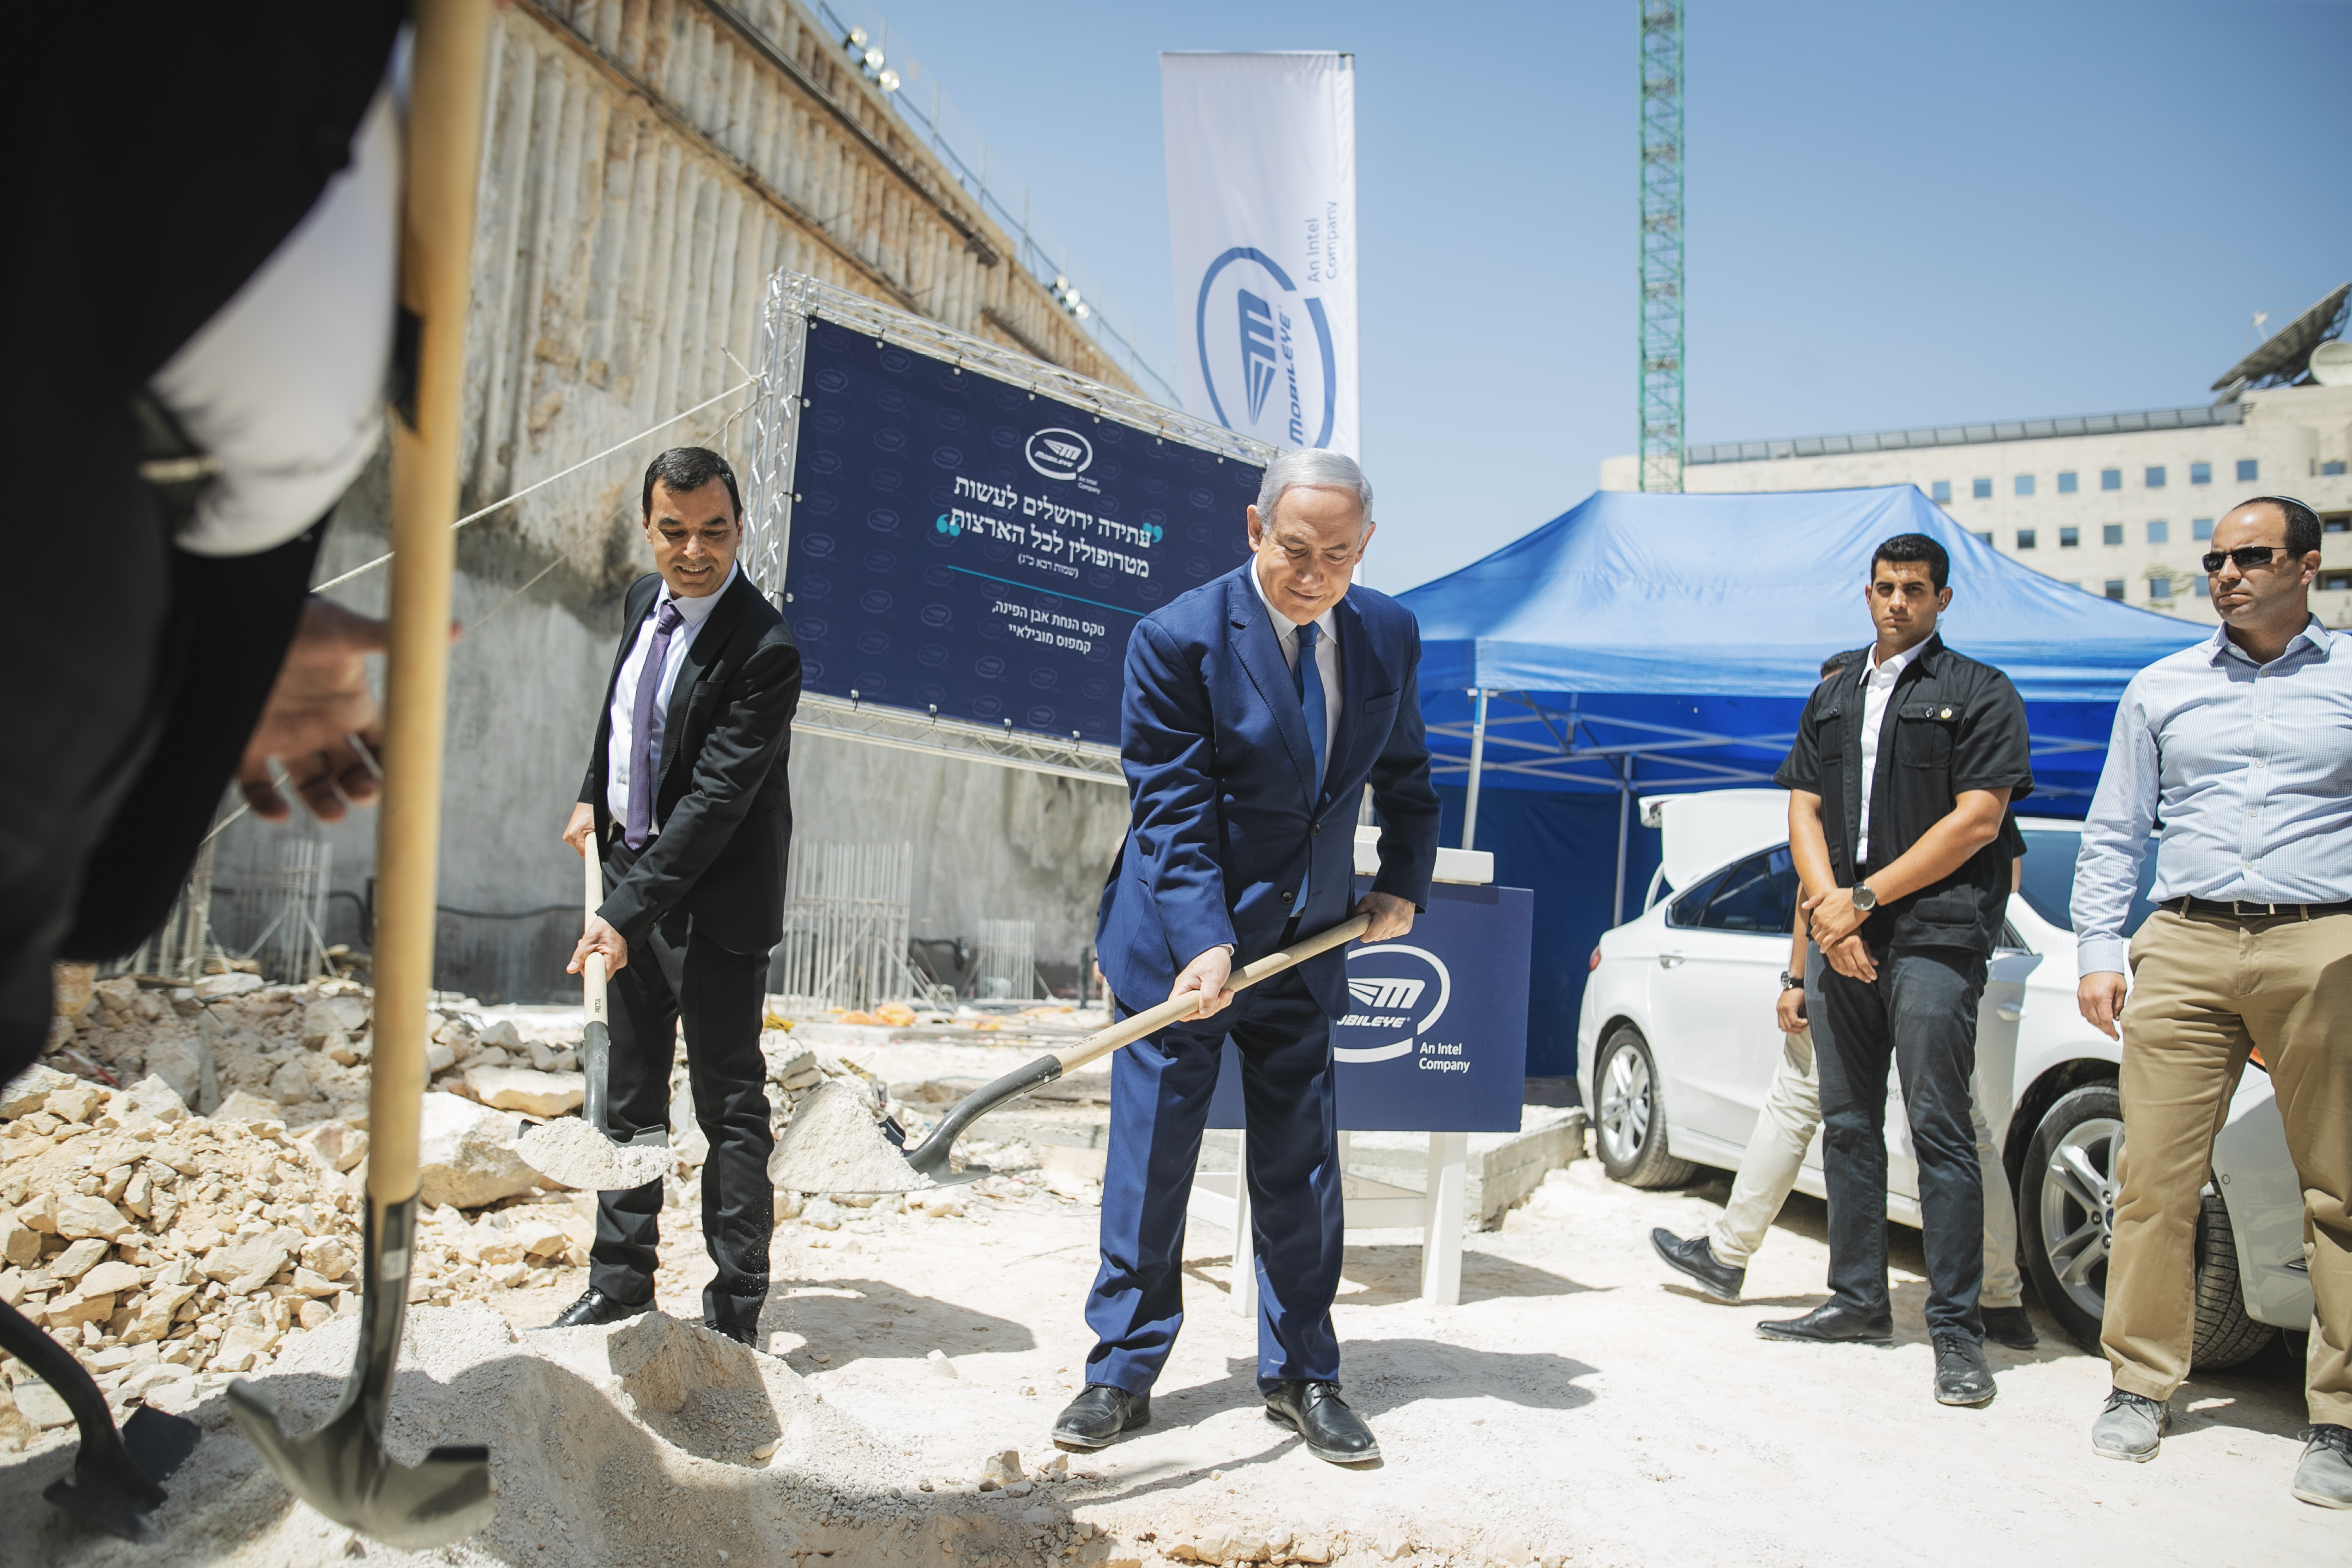 Intel Senior Vice President and Mobileye CEO Prof. Amnon Shashua (left) and Israeli Prime Minister Benjamin Netanyahu lay the cornerstone for Mobileye's new global development center in Jerusalem on Tuesday, Aug. 27, 2019. The eight-story center marks the largest investment in the history of Israel and is set to employ 2,700 people. (Credit: Victor Levi/Mobileye)